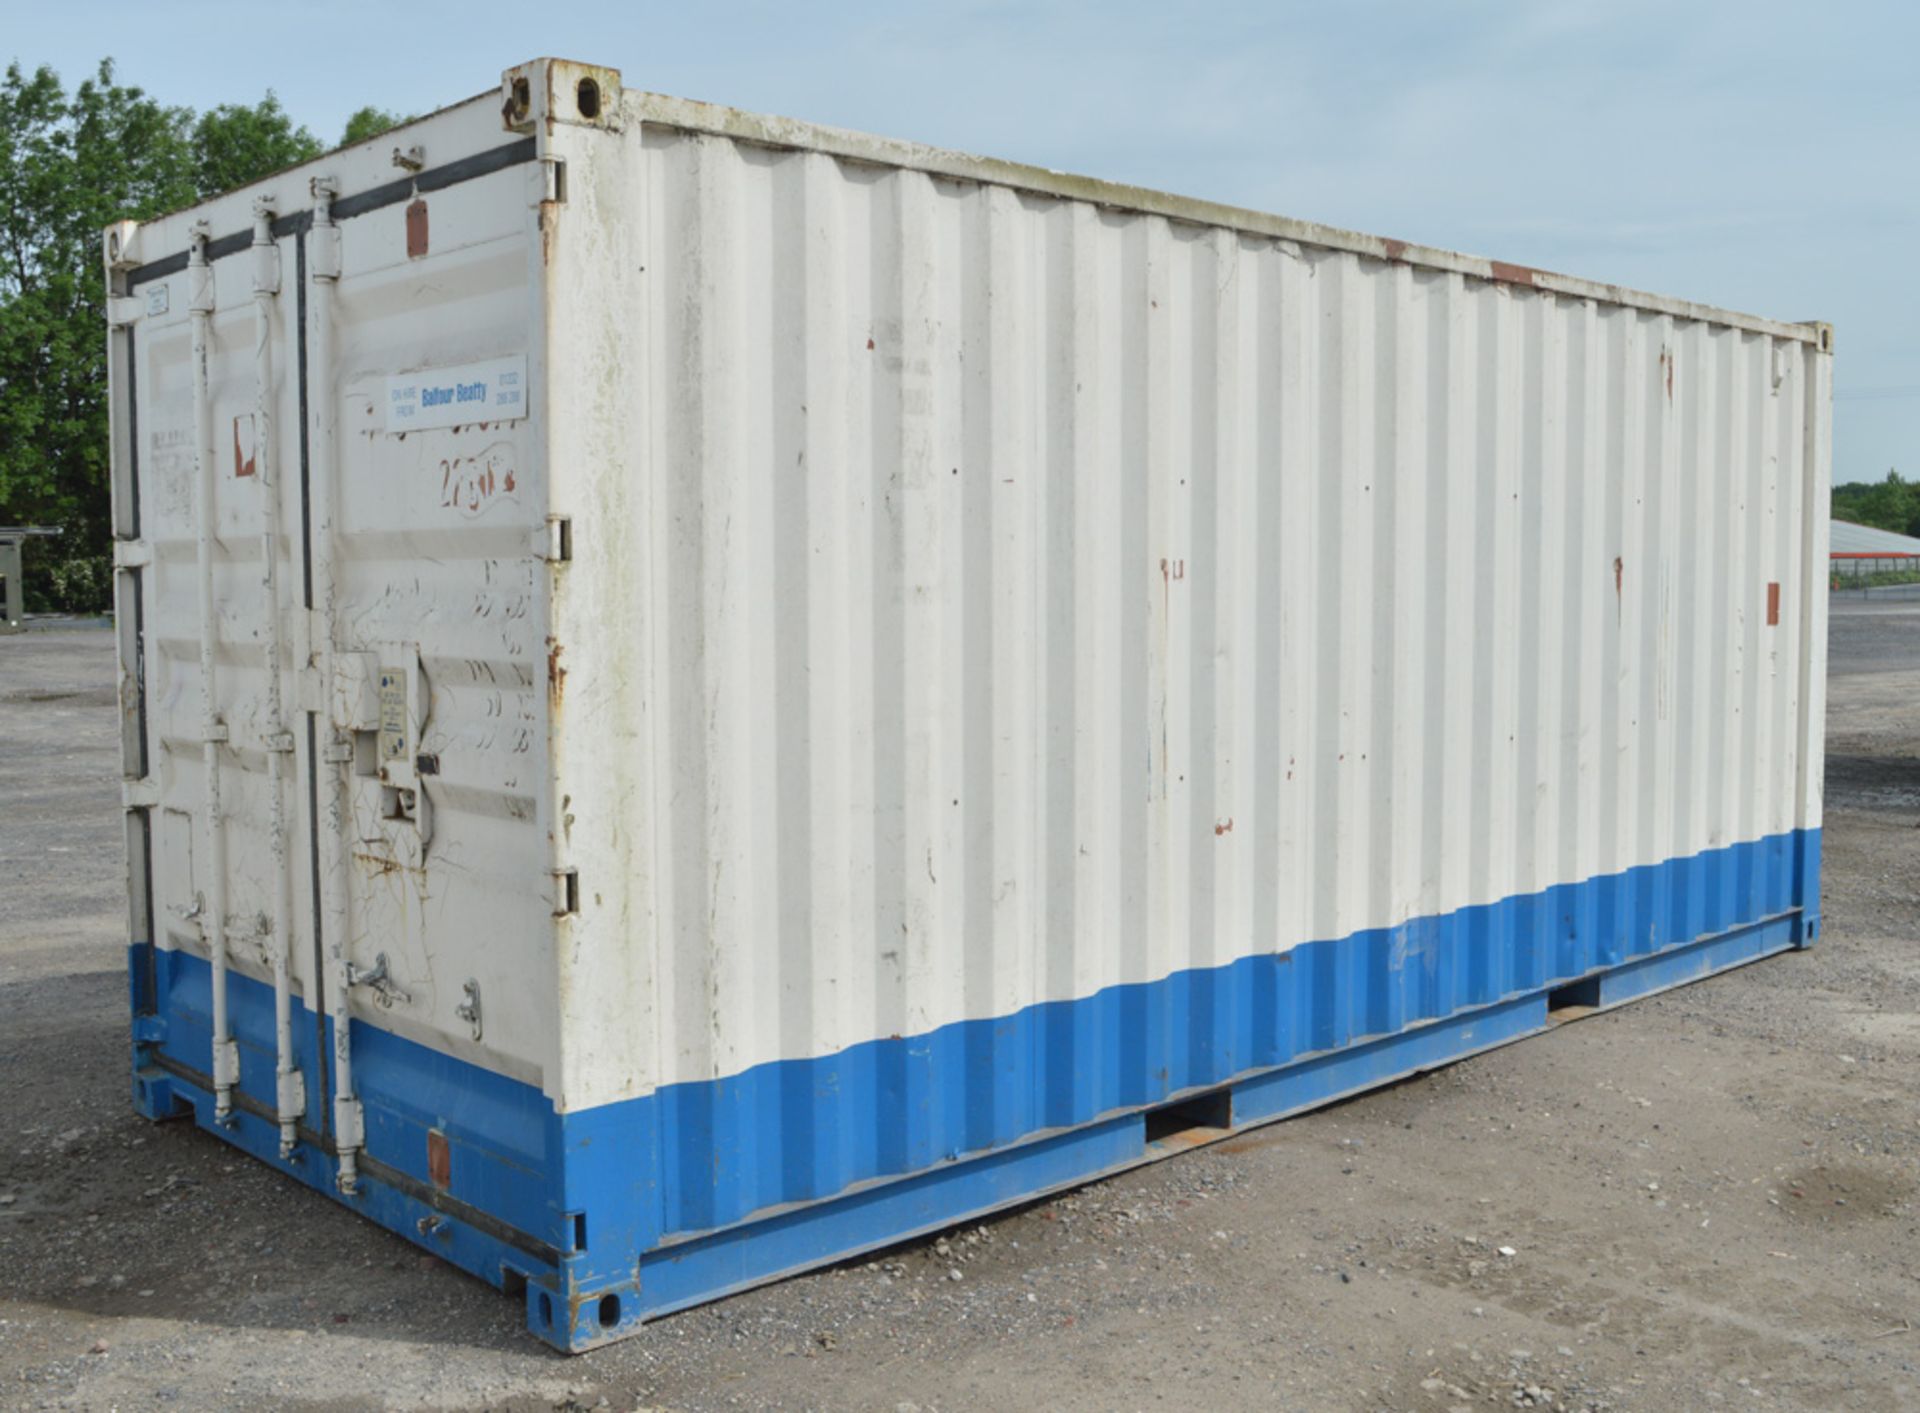 20 ft x 8 ft steel shipping container BB2261